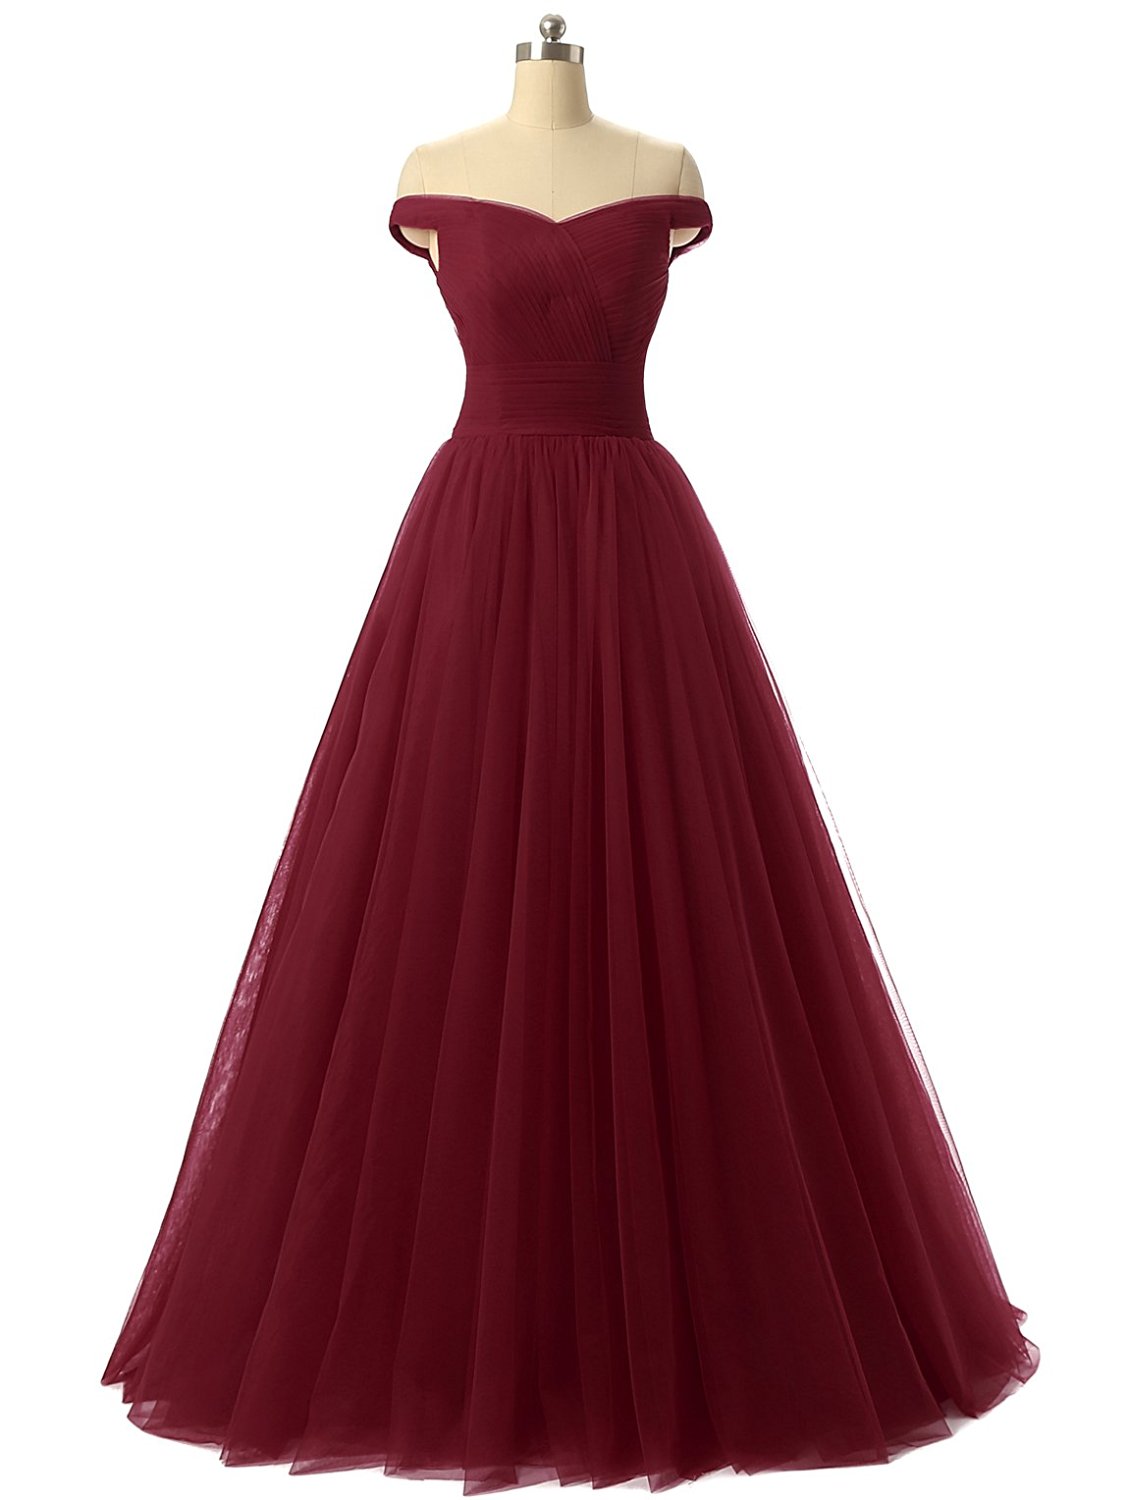 A-line Tulle Prom Formal Evening Dress, Sexy Burgundy Prom Dresses, Red Prom Dress, Tulle Prom Dress, Off The Shoulder Prom Dress